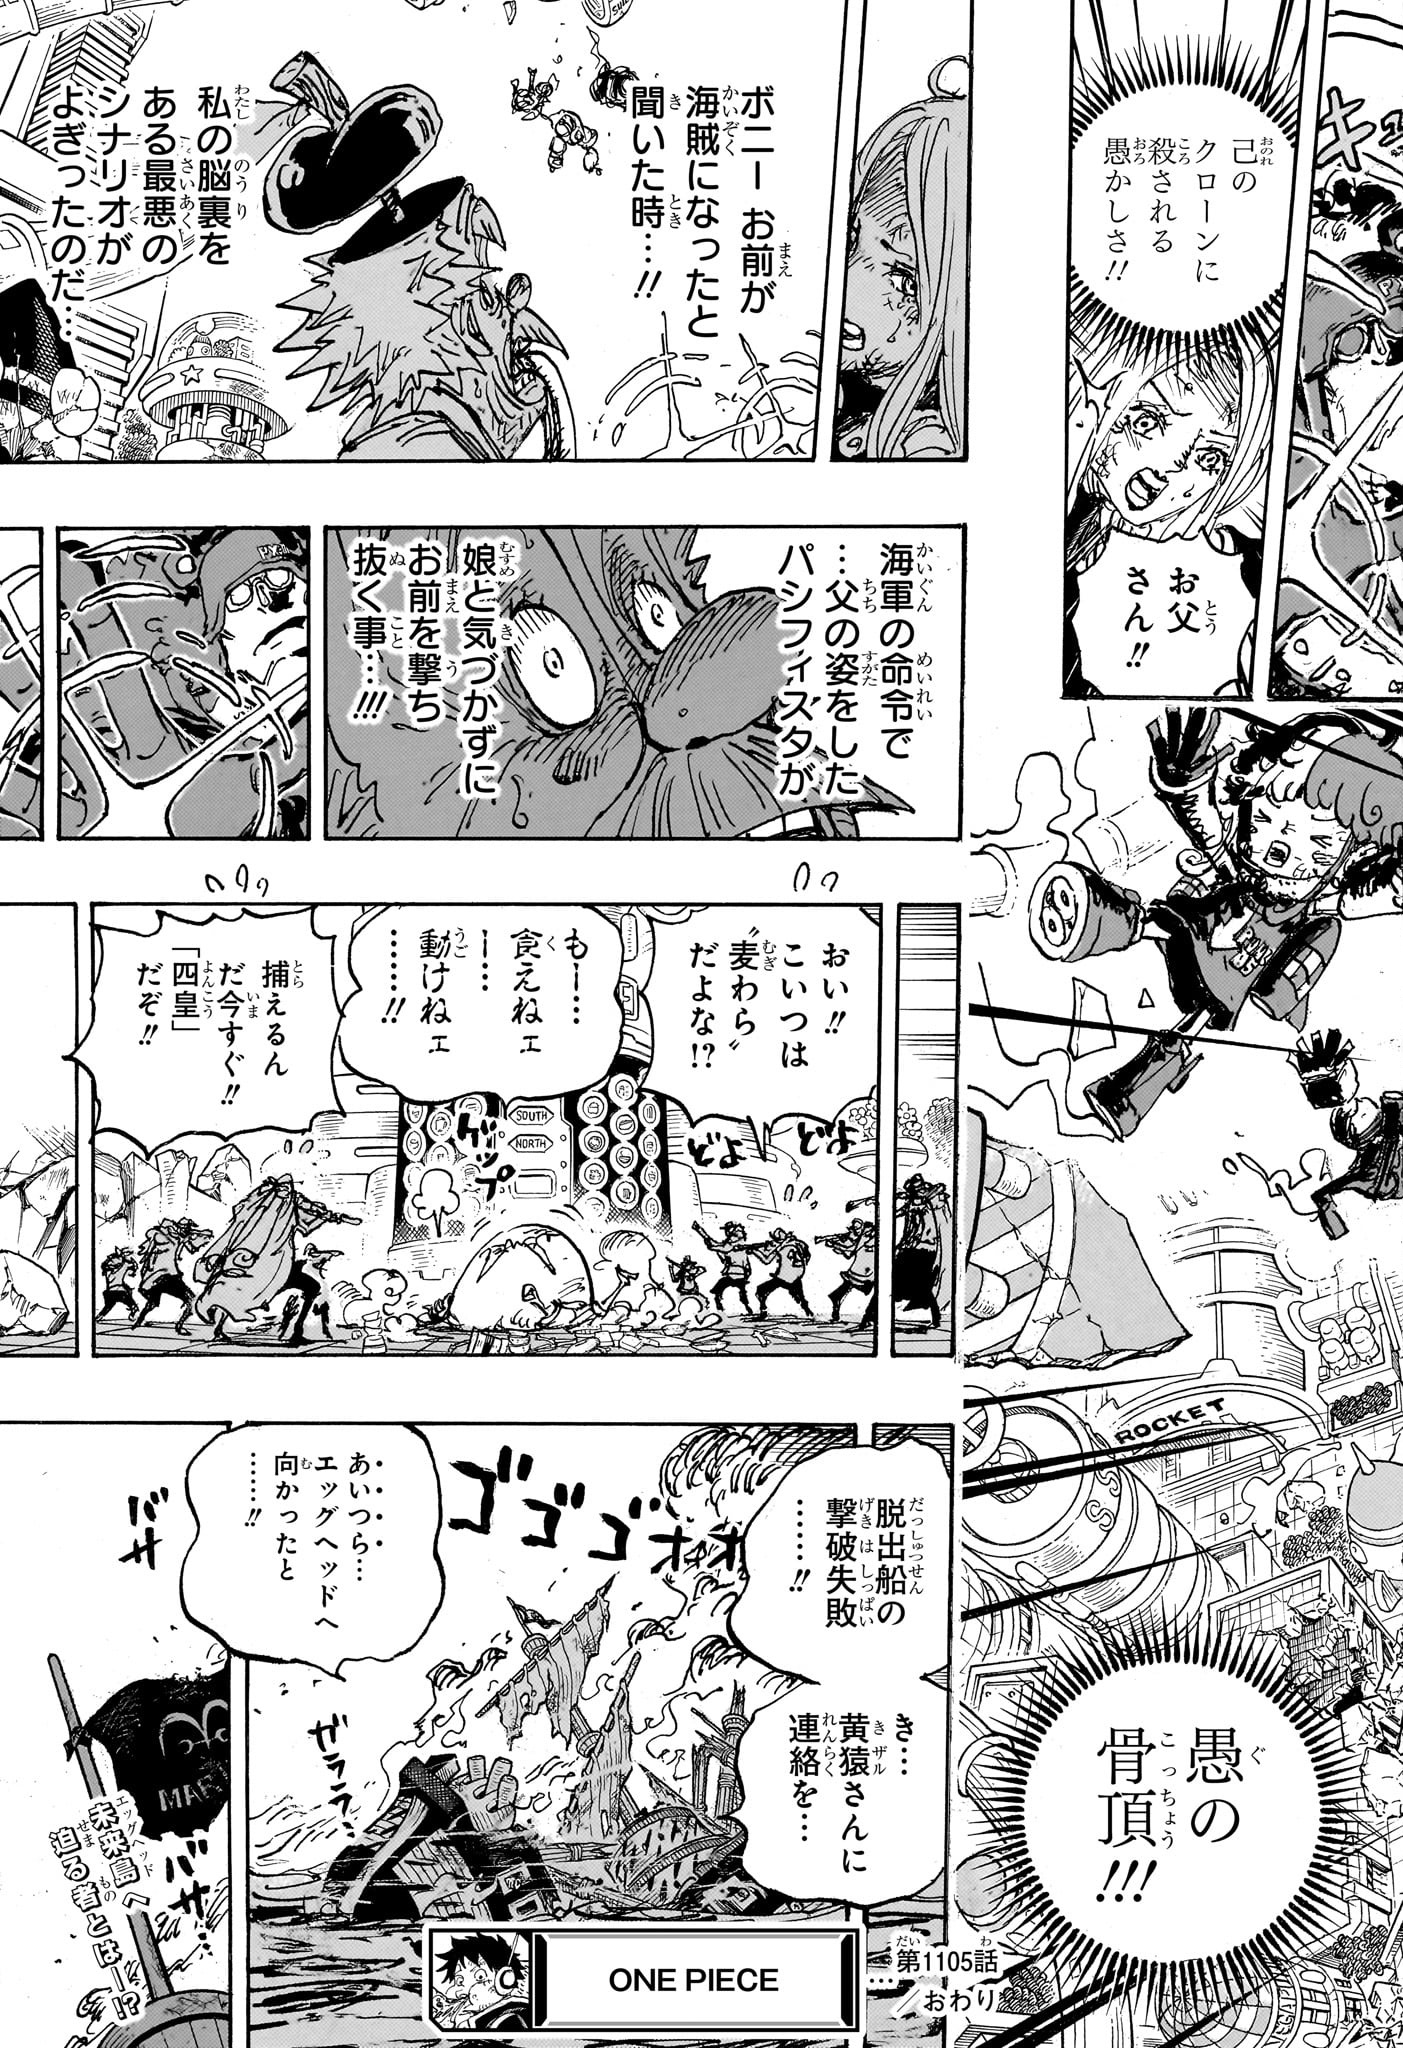 One Piece - Chapter 1105 - Page 13